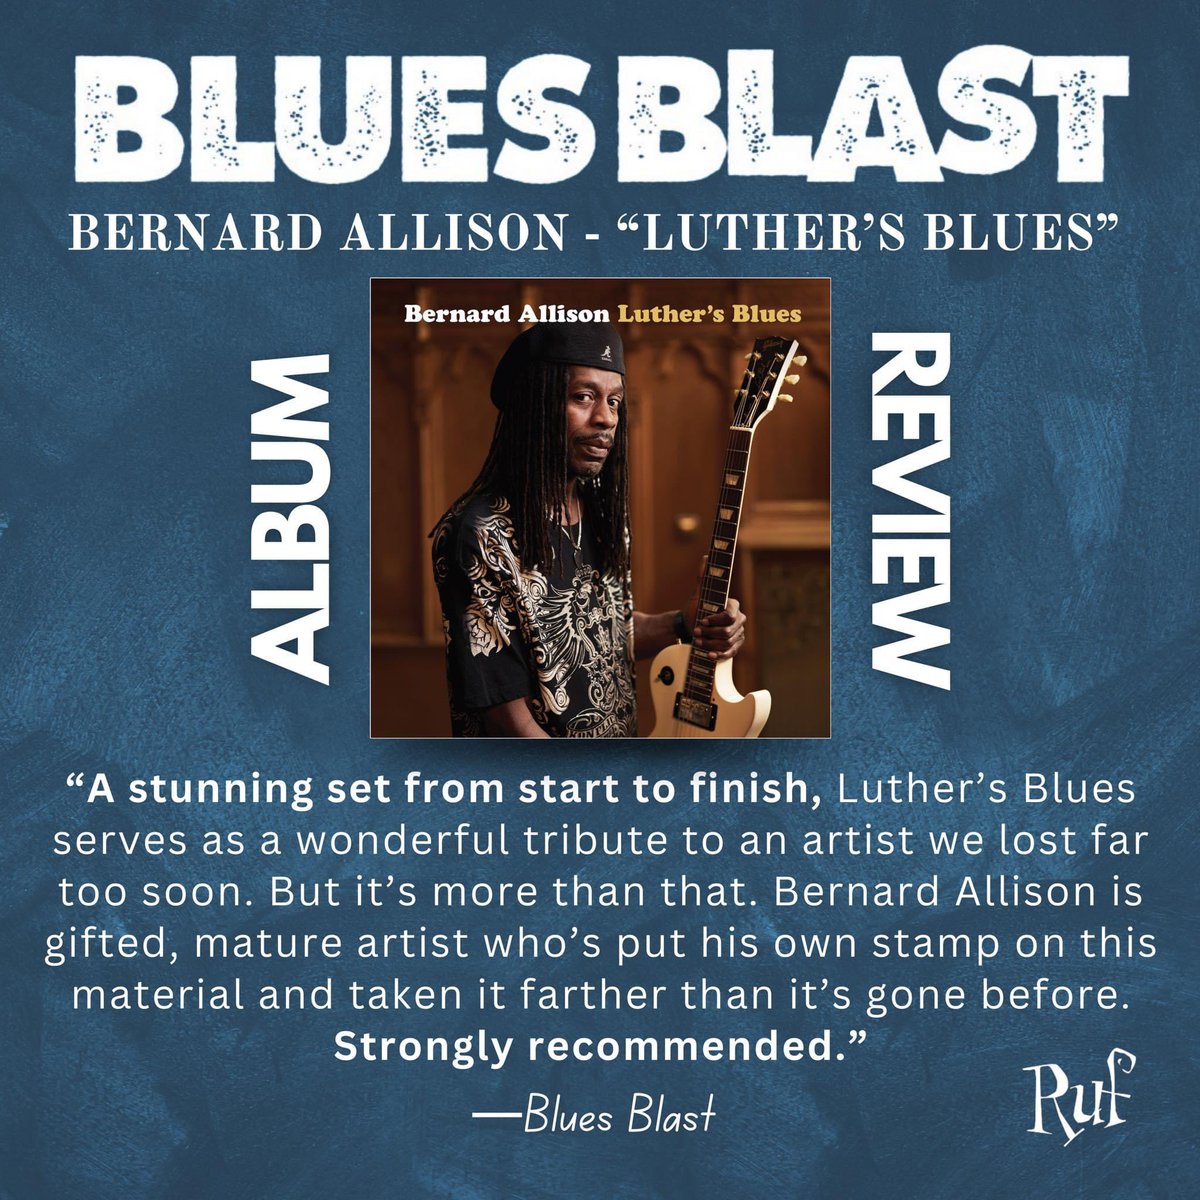 𝐀𝐋𝐁𝐔𝐌 𝐑𝐄𝐕𝐈𝐄𝐖 🙏🏾 Thank you Blues Blast Magazine for the great review! CHECK IT OUT! ➡️bluesblastmagazine.com/bernard-alliso… 💿💿The double CD and 💿💿 Double Vinyl is available now!🔥Get a copy: bernardallison.com/shop 🎵 orcd.co/wal73mx